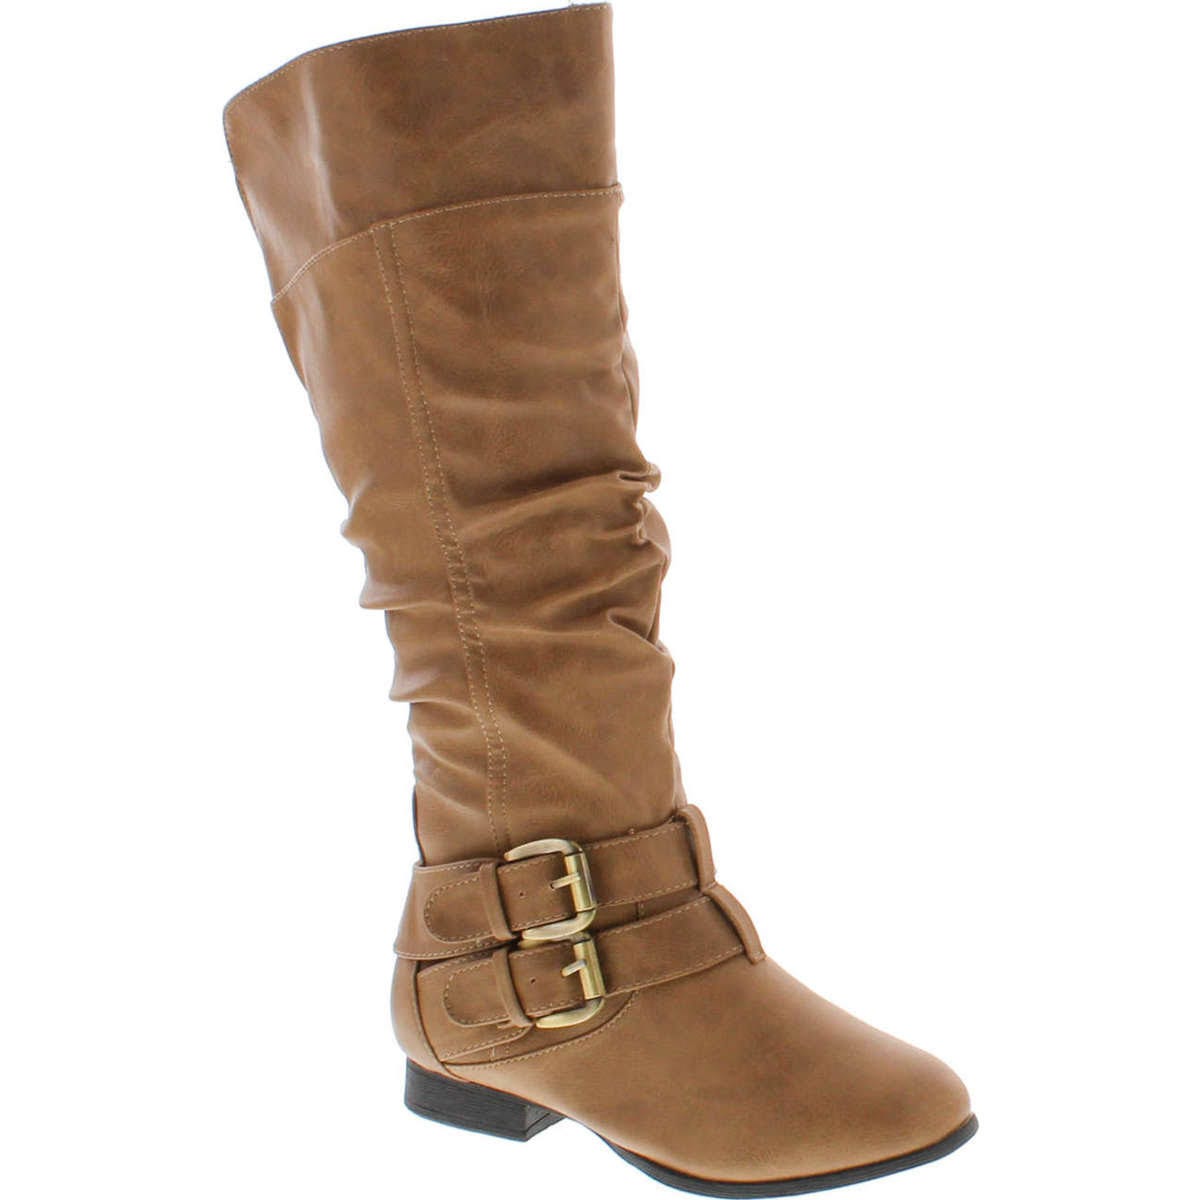 Stylish Flat Thigh High Boots in Taupe | Image